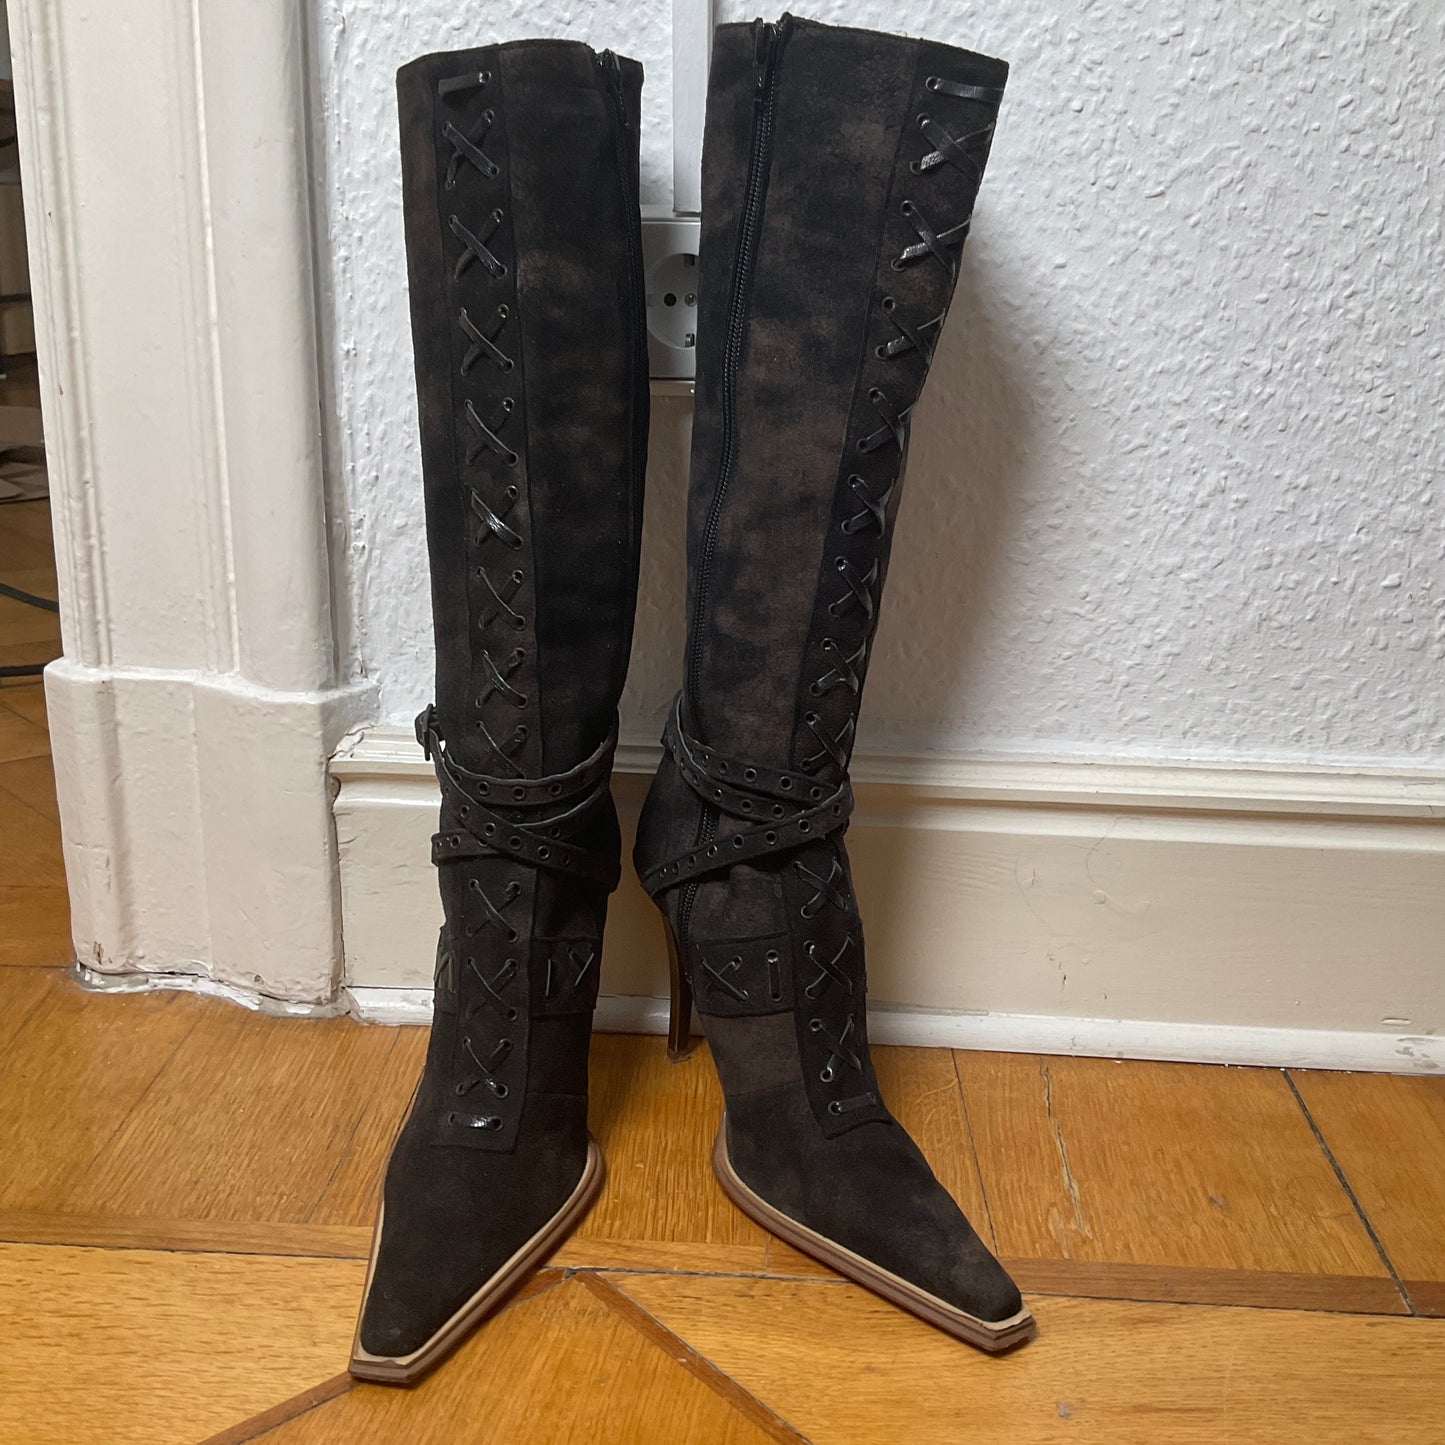 Pointy pirate boots